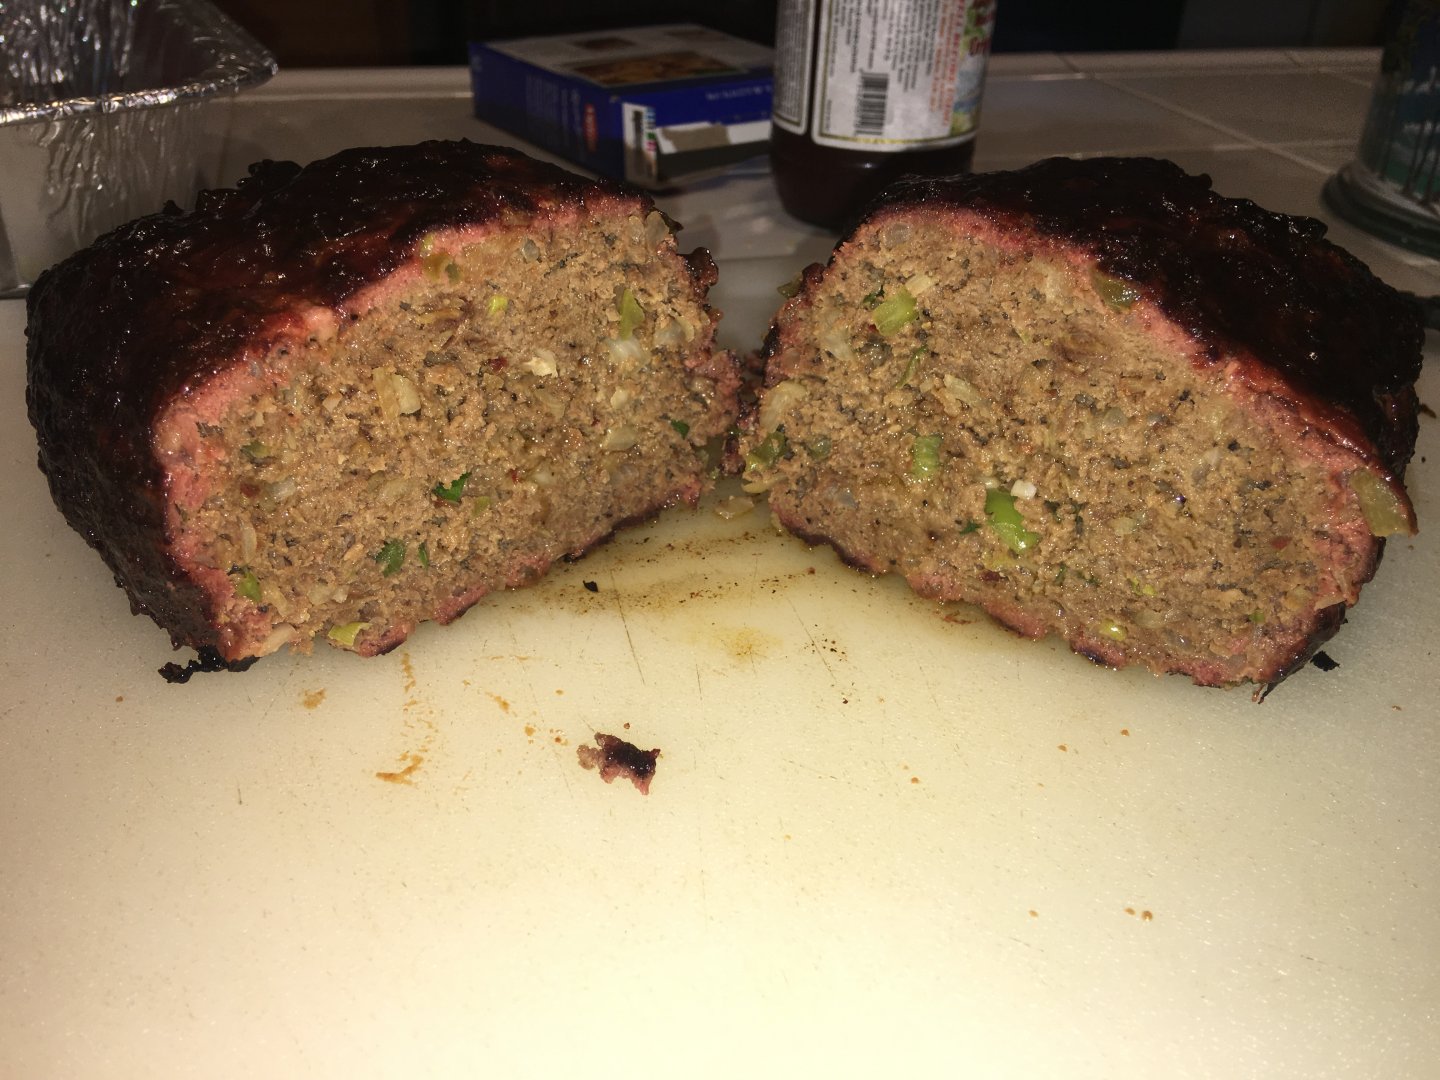 How Long To Cook A 2 Pound Meatloaf At 325 Degrees - How Long To Cook Meatloaf At 375 Degrees ...